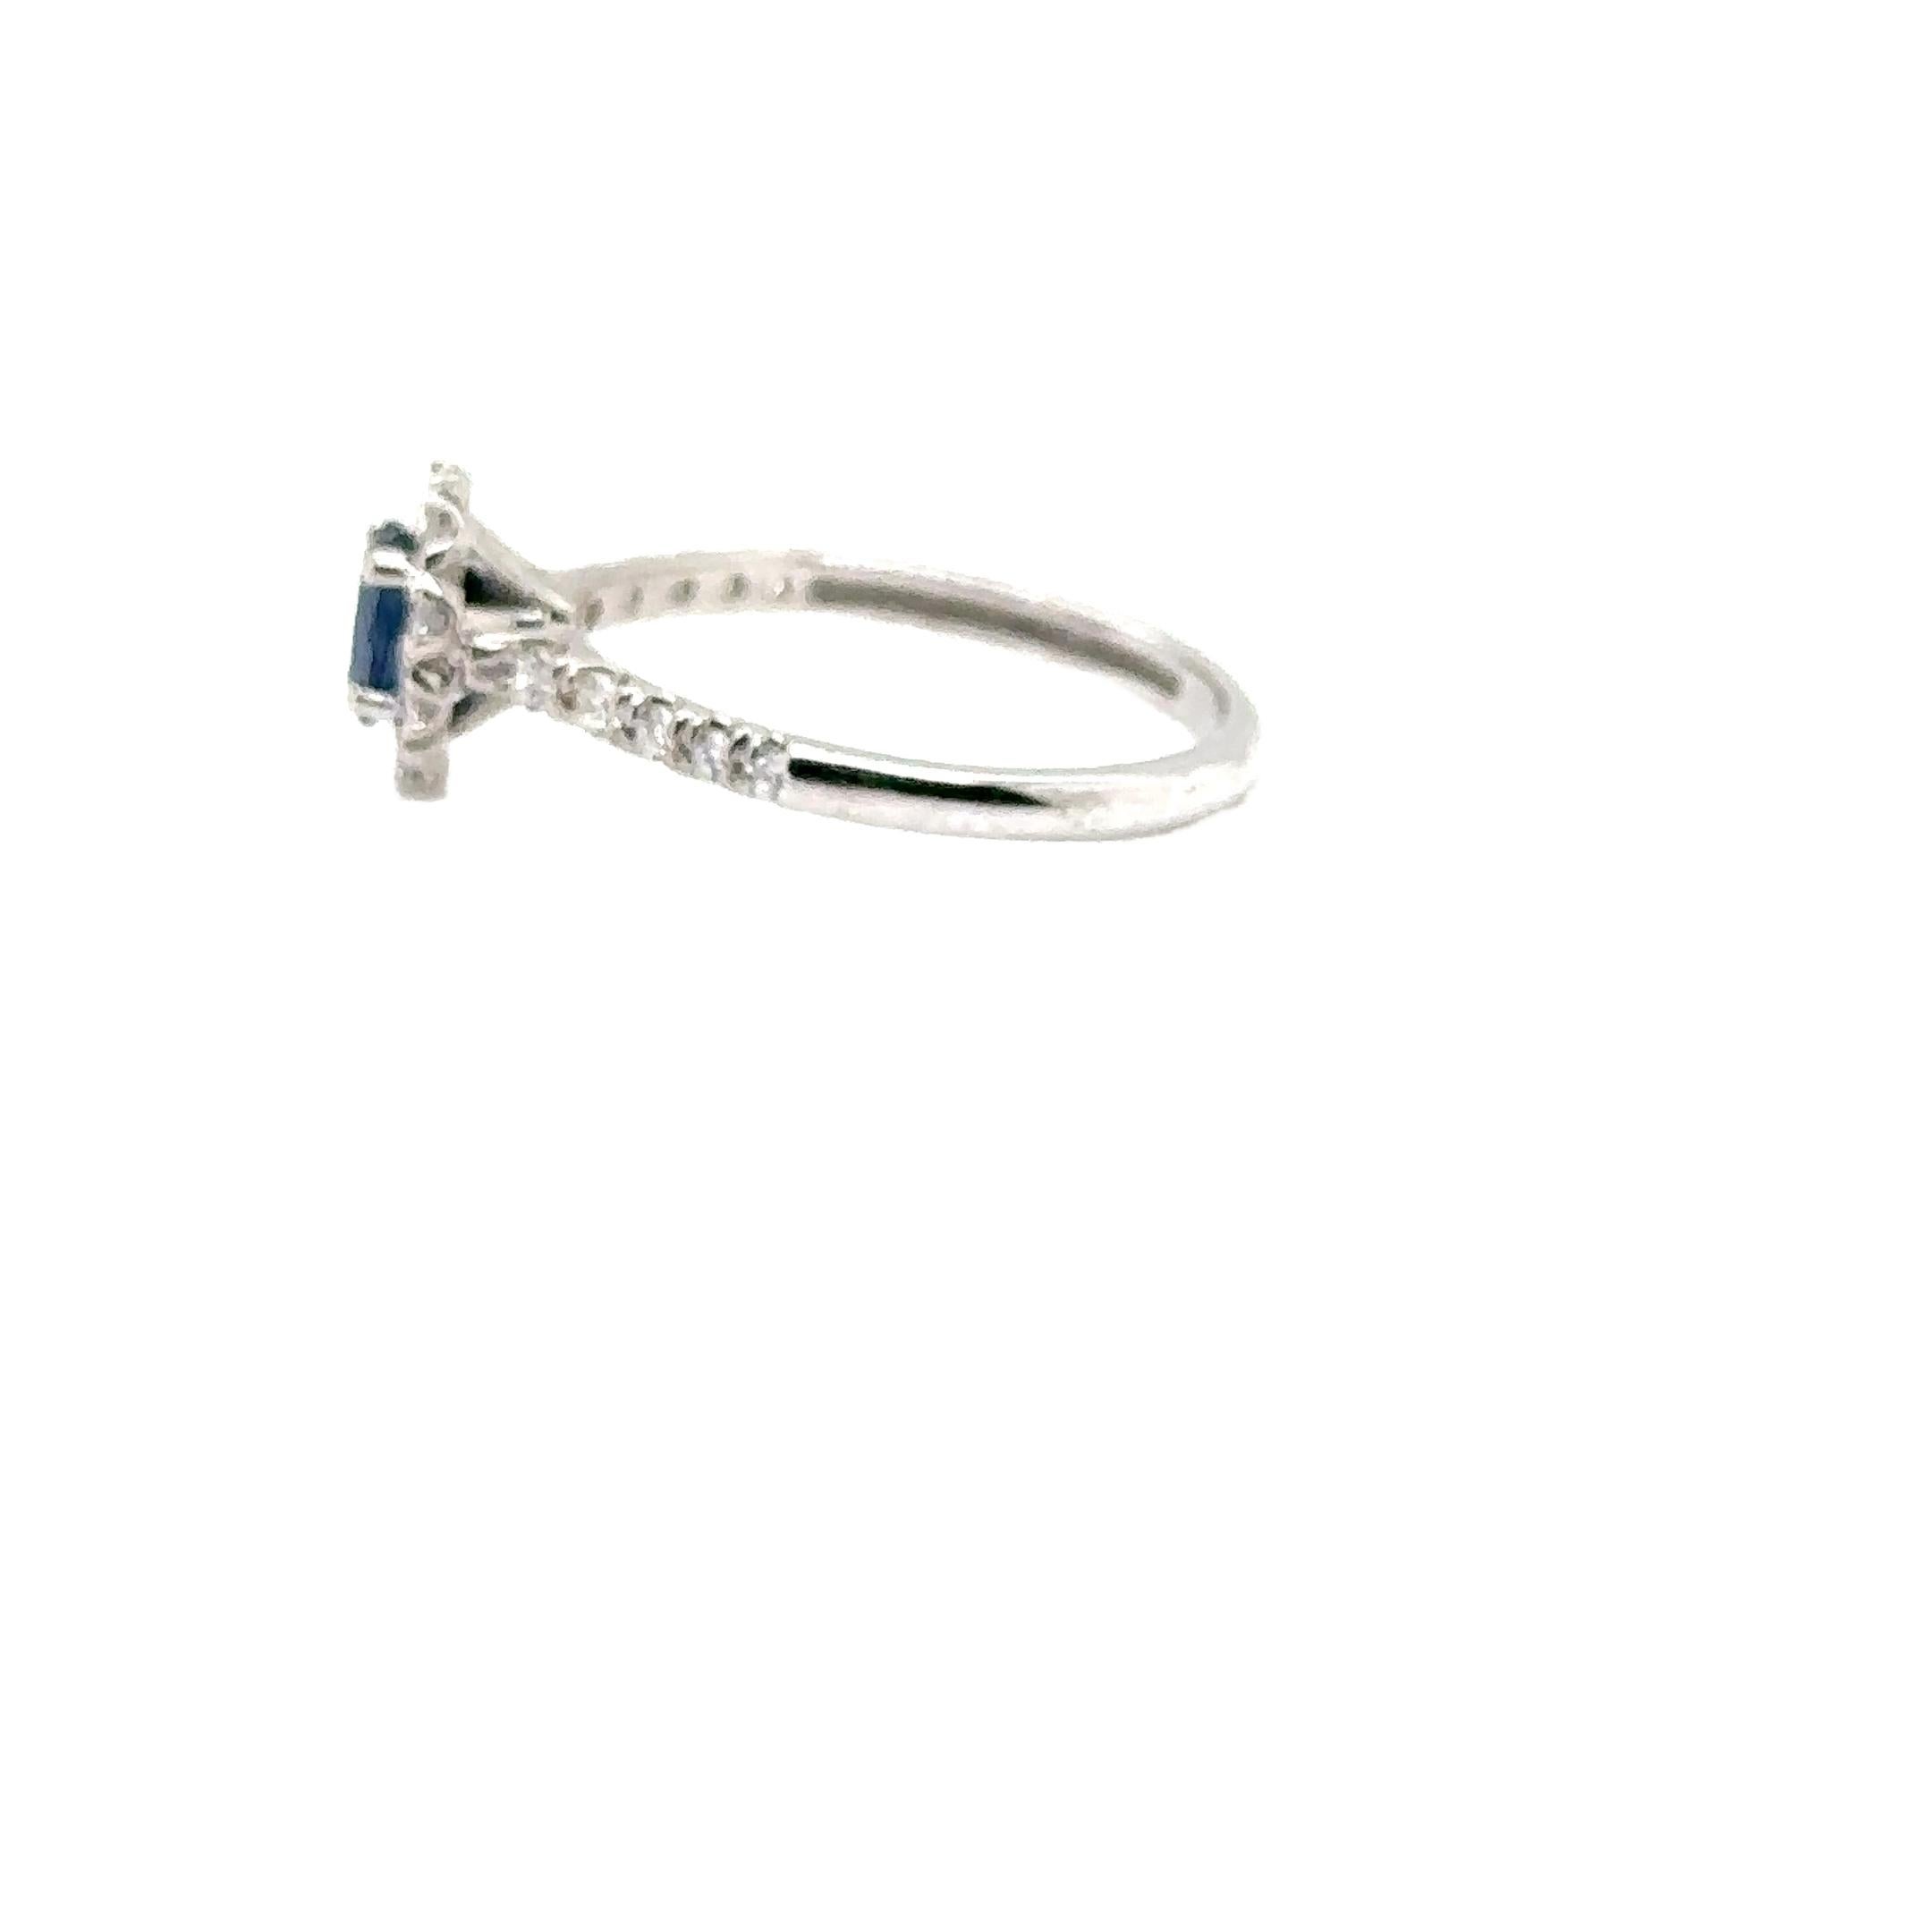 JAS-21-2236 - 14K WHITE GOLD OVAL SAPPHIRE RING with DIAMONDS For Sale 1